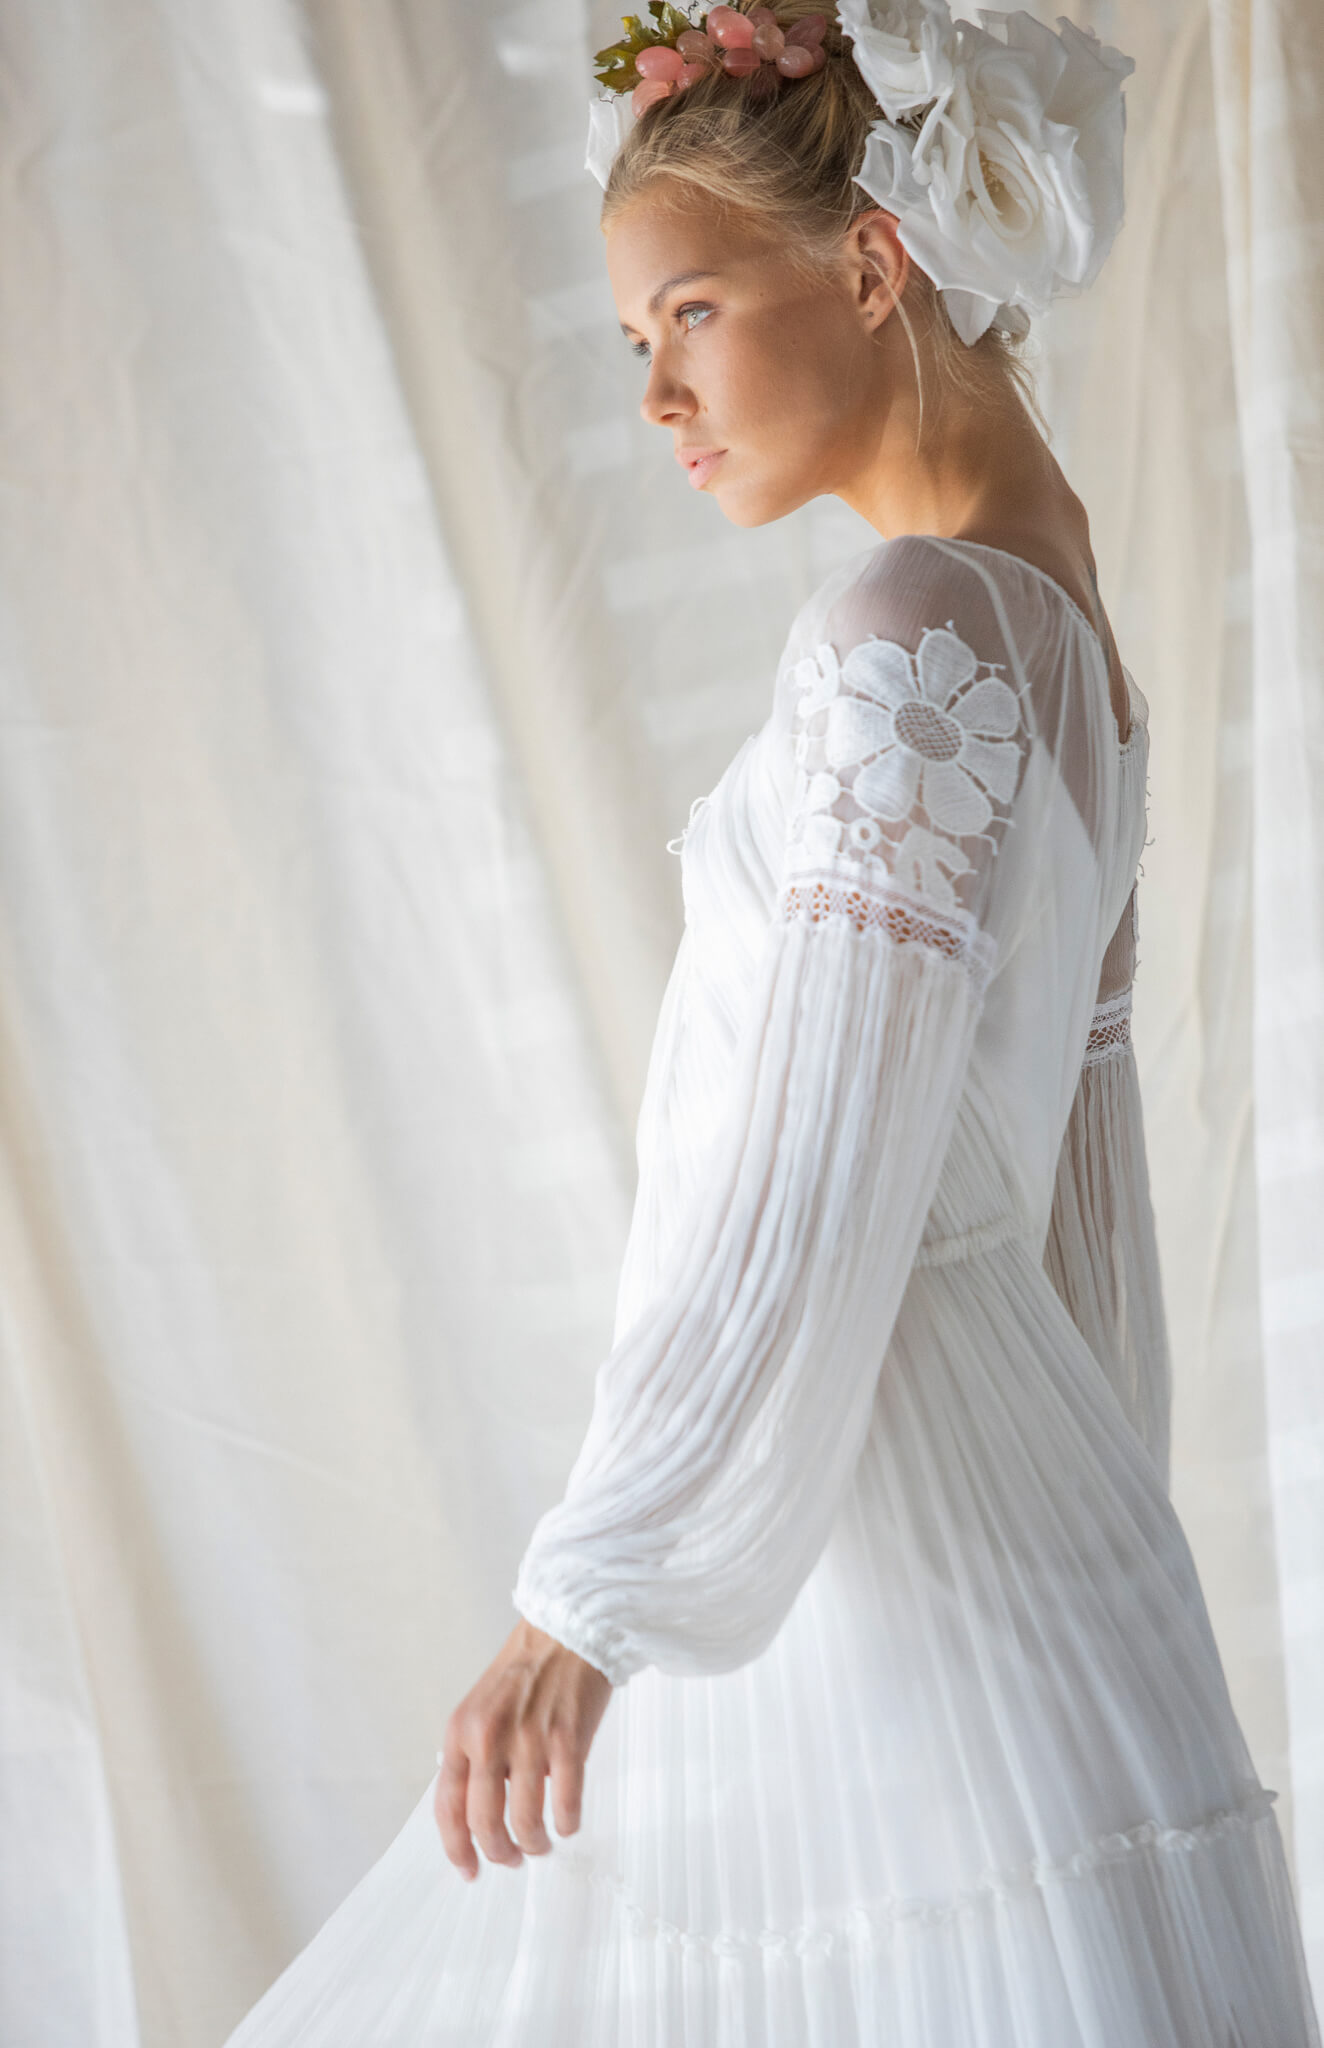 Bride silk dress with embroidery